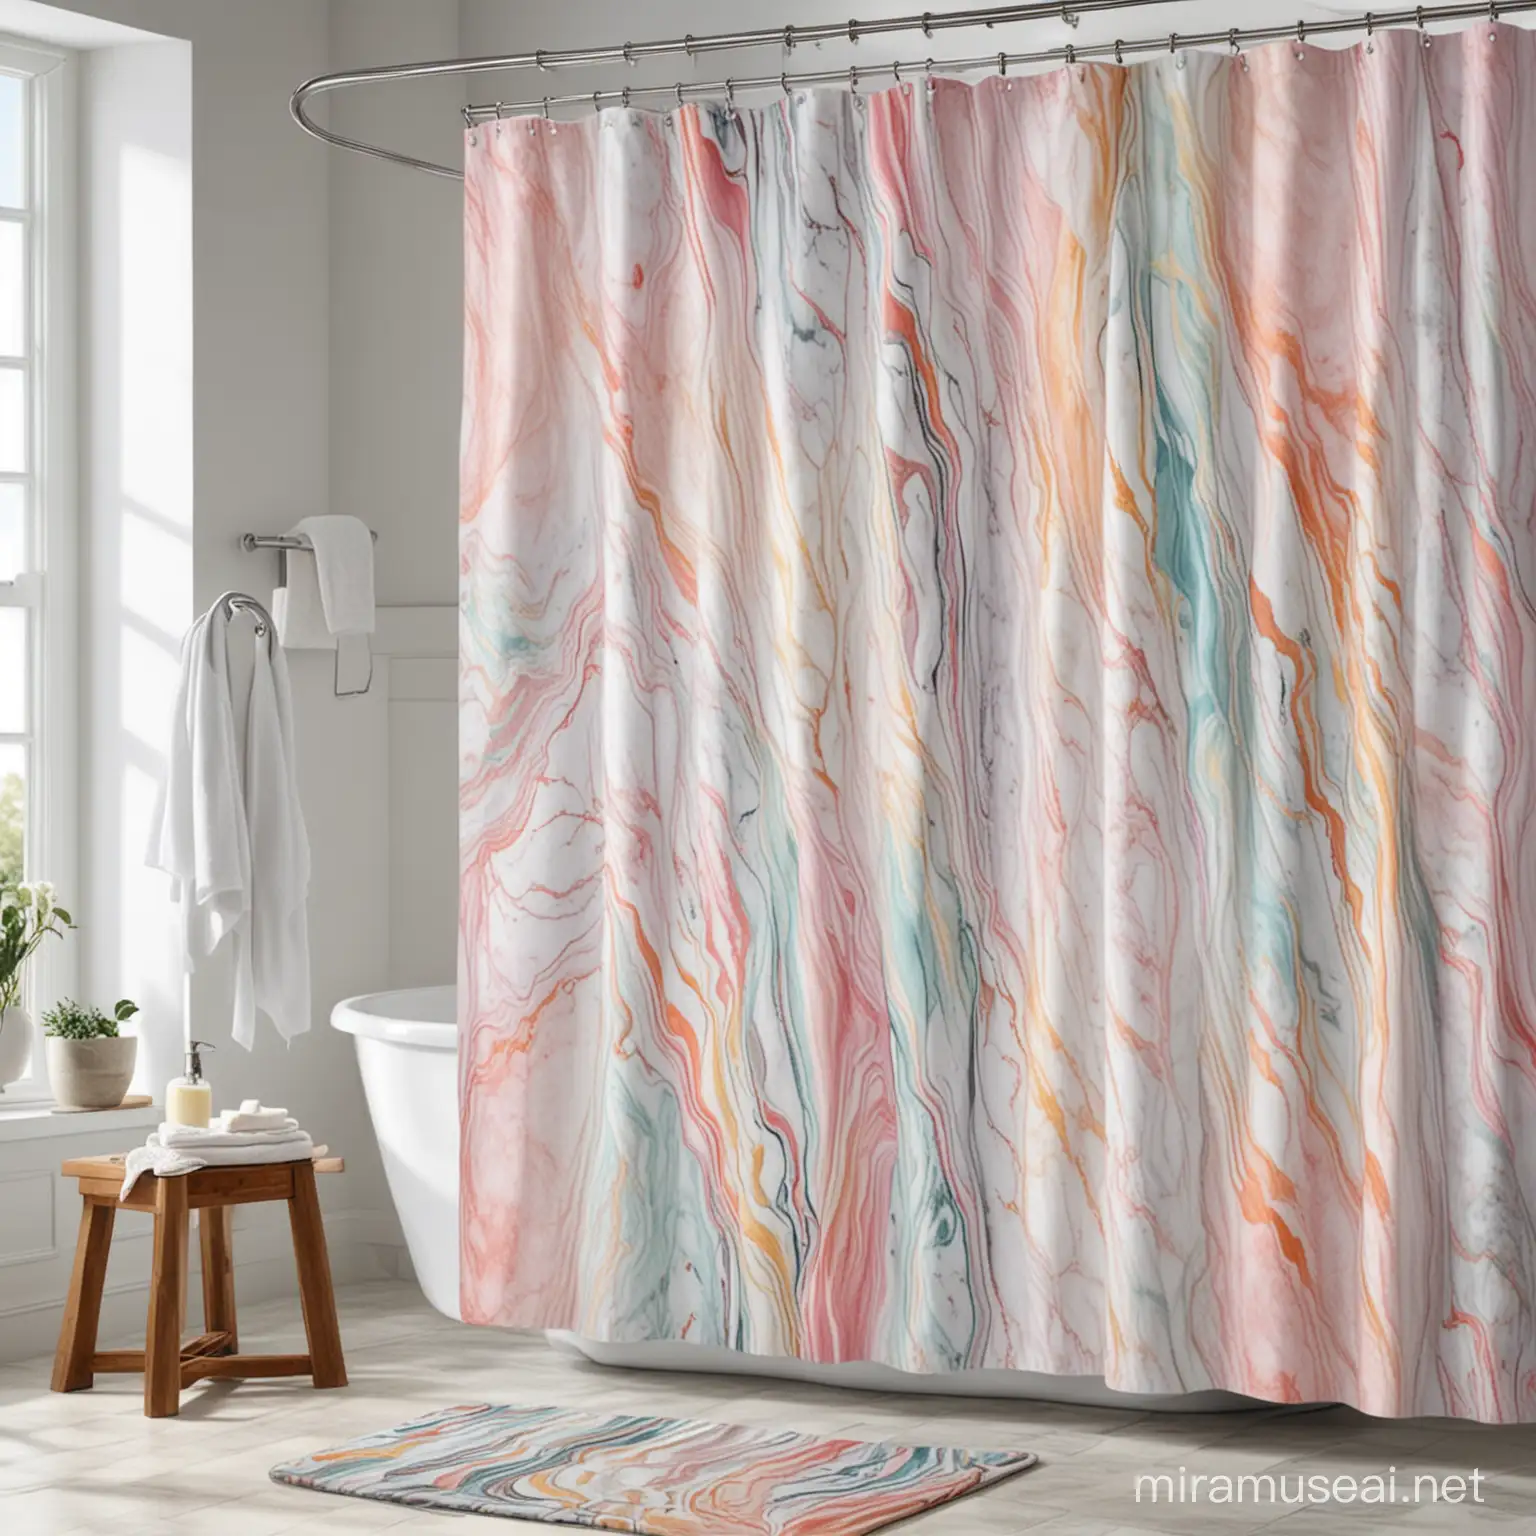 Marble multicolored shower curtains